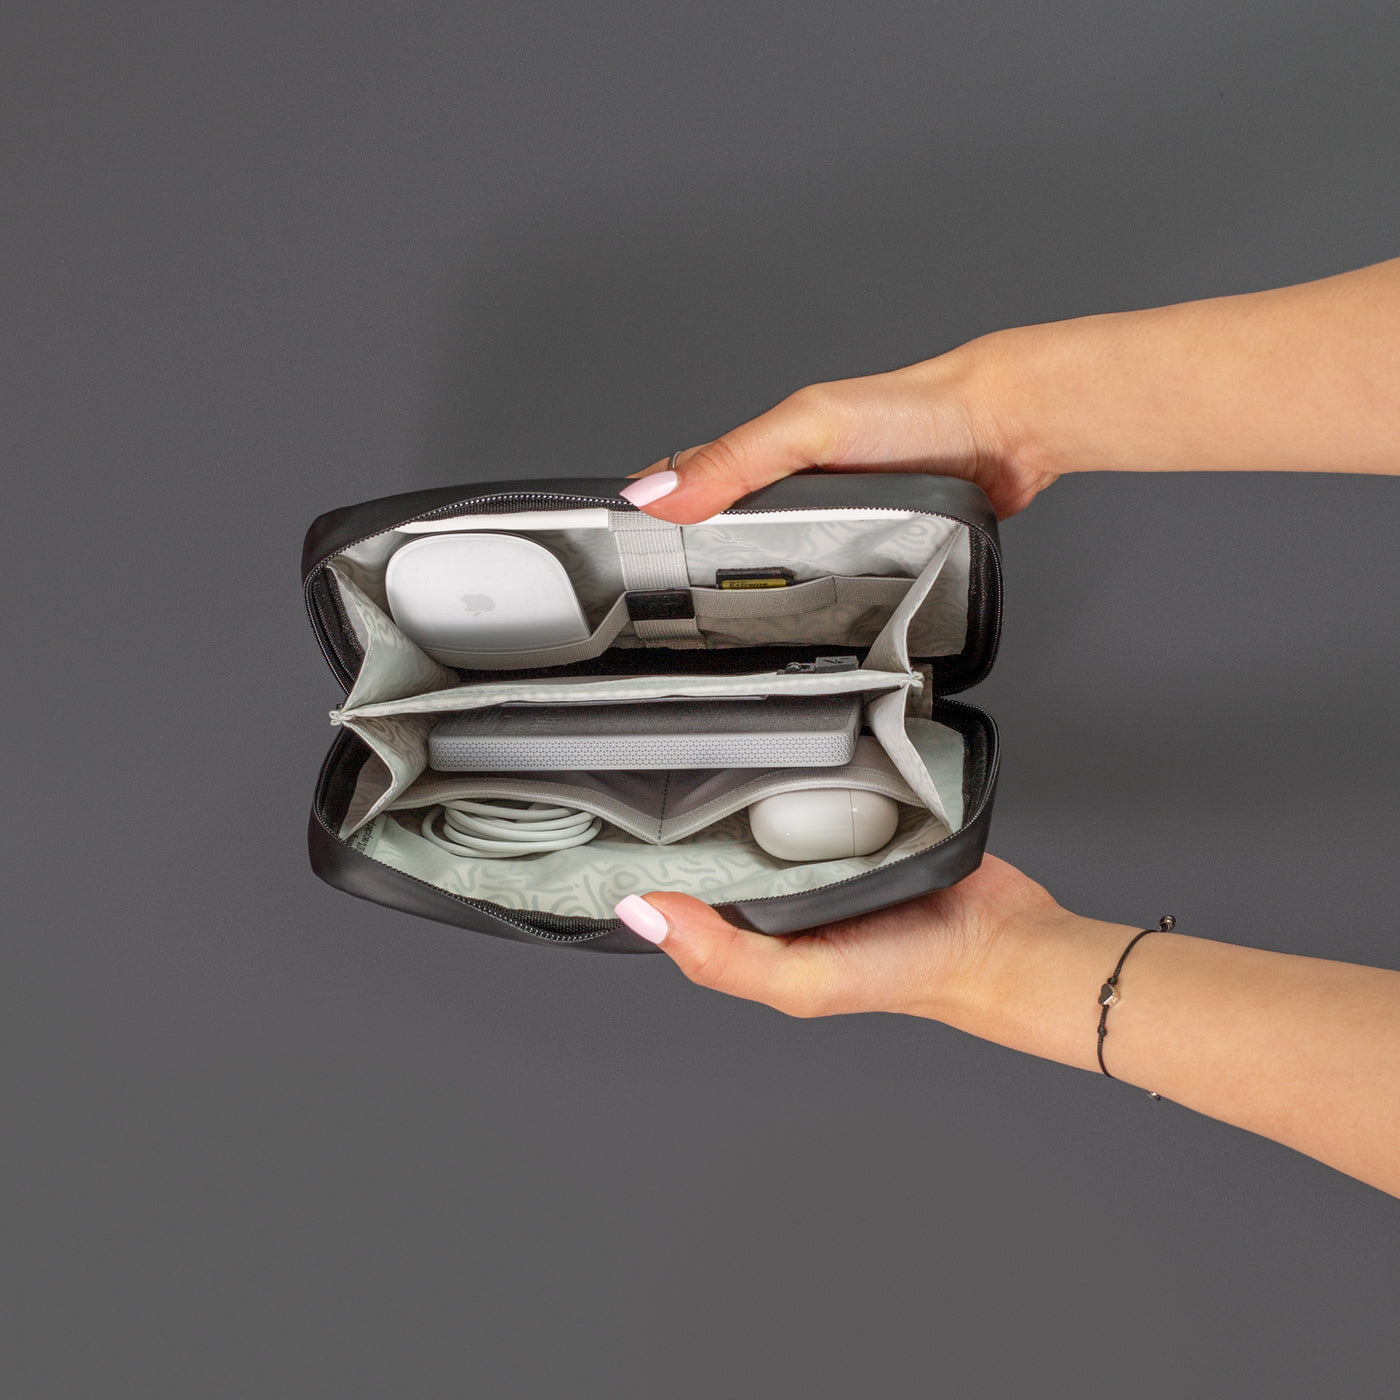 Female hands coming into shot from the right side holding open the Miho Black Eco Essentials Pouch to provide an internal view of the storage. On a black background, packed inside the mesh pockets and elastic loops are Apple Airpods, an Apple Mouse, an SD card, an Apple charging cable and a Mophie powerstation mini universal battery.